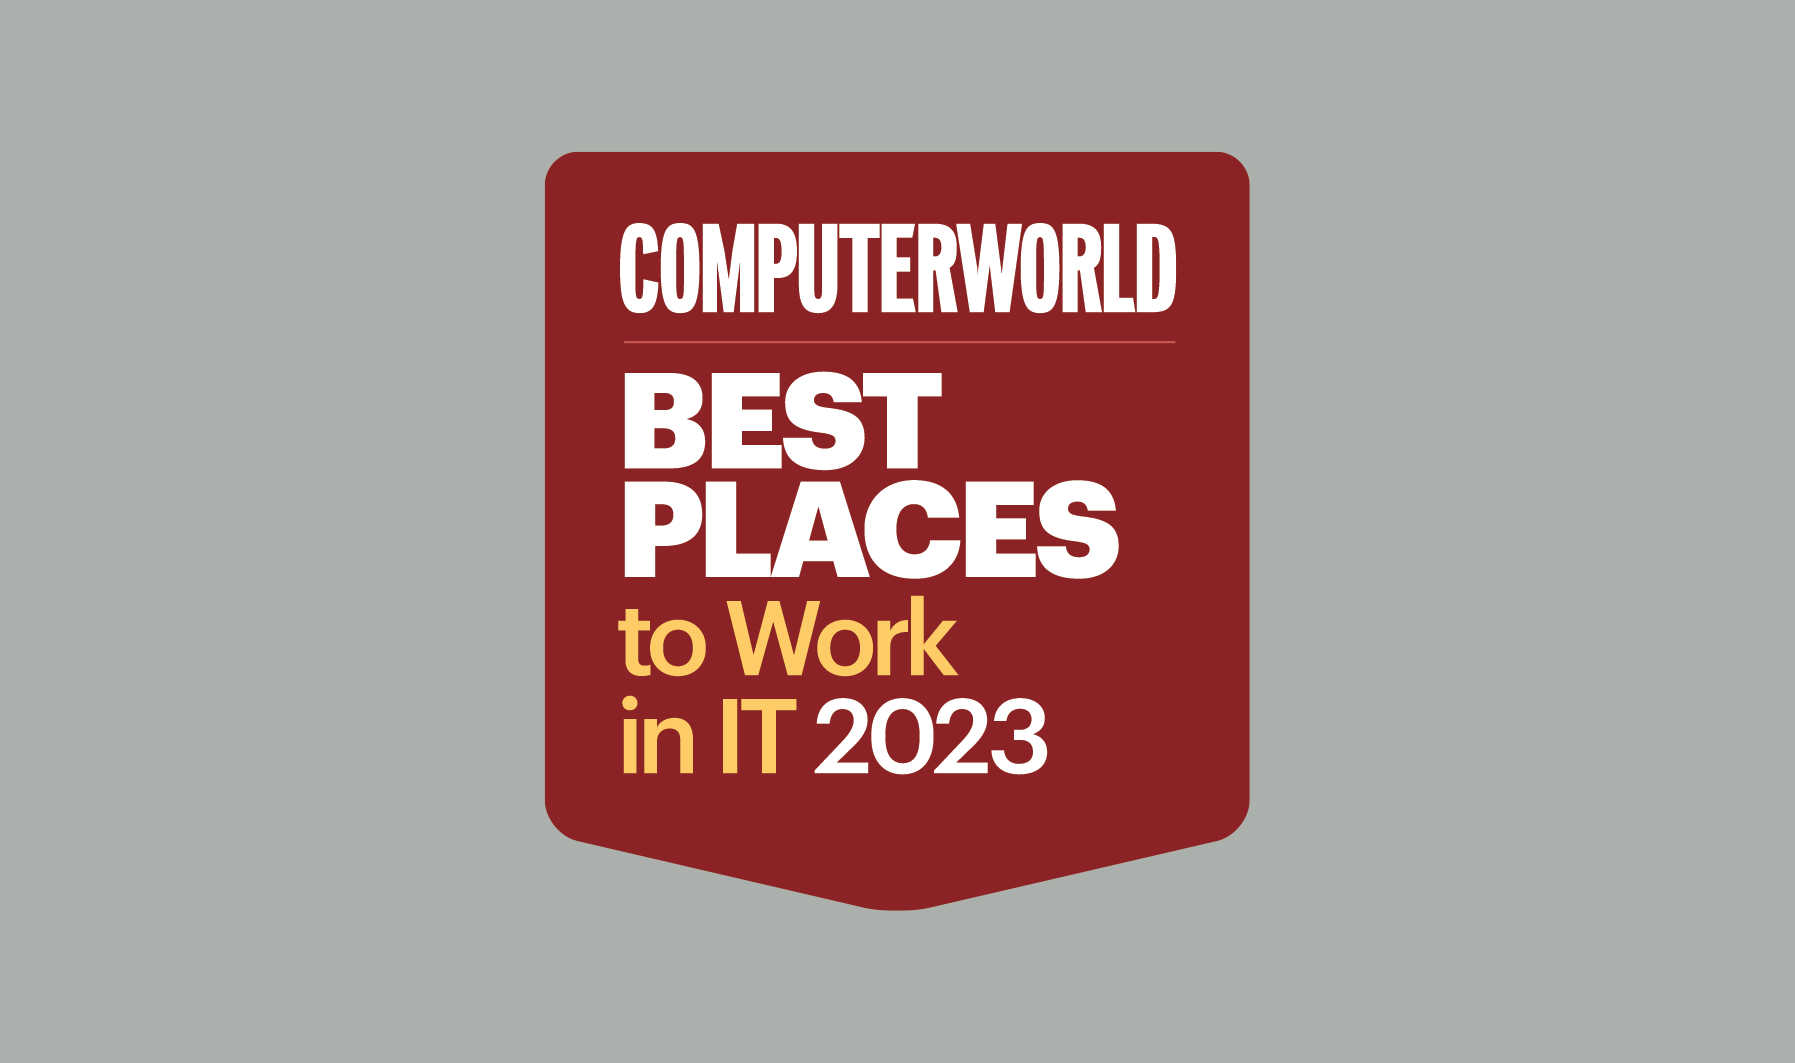 Red Computerworld Best Places to Work in IT 2023 award logo on grey background